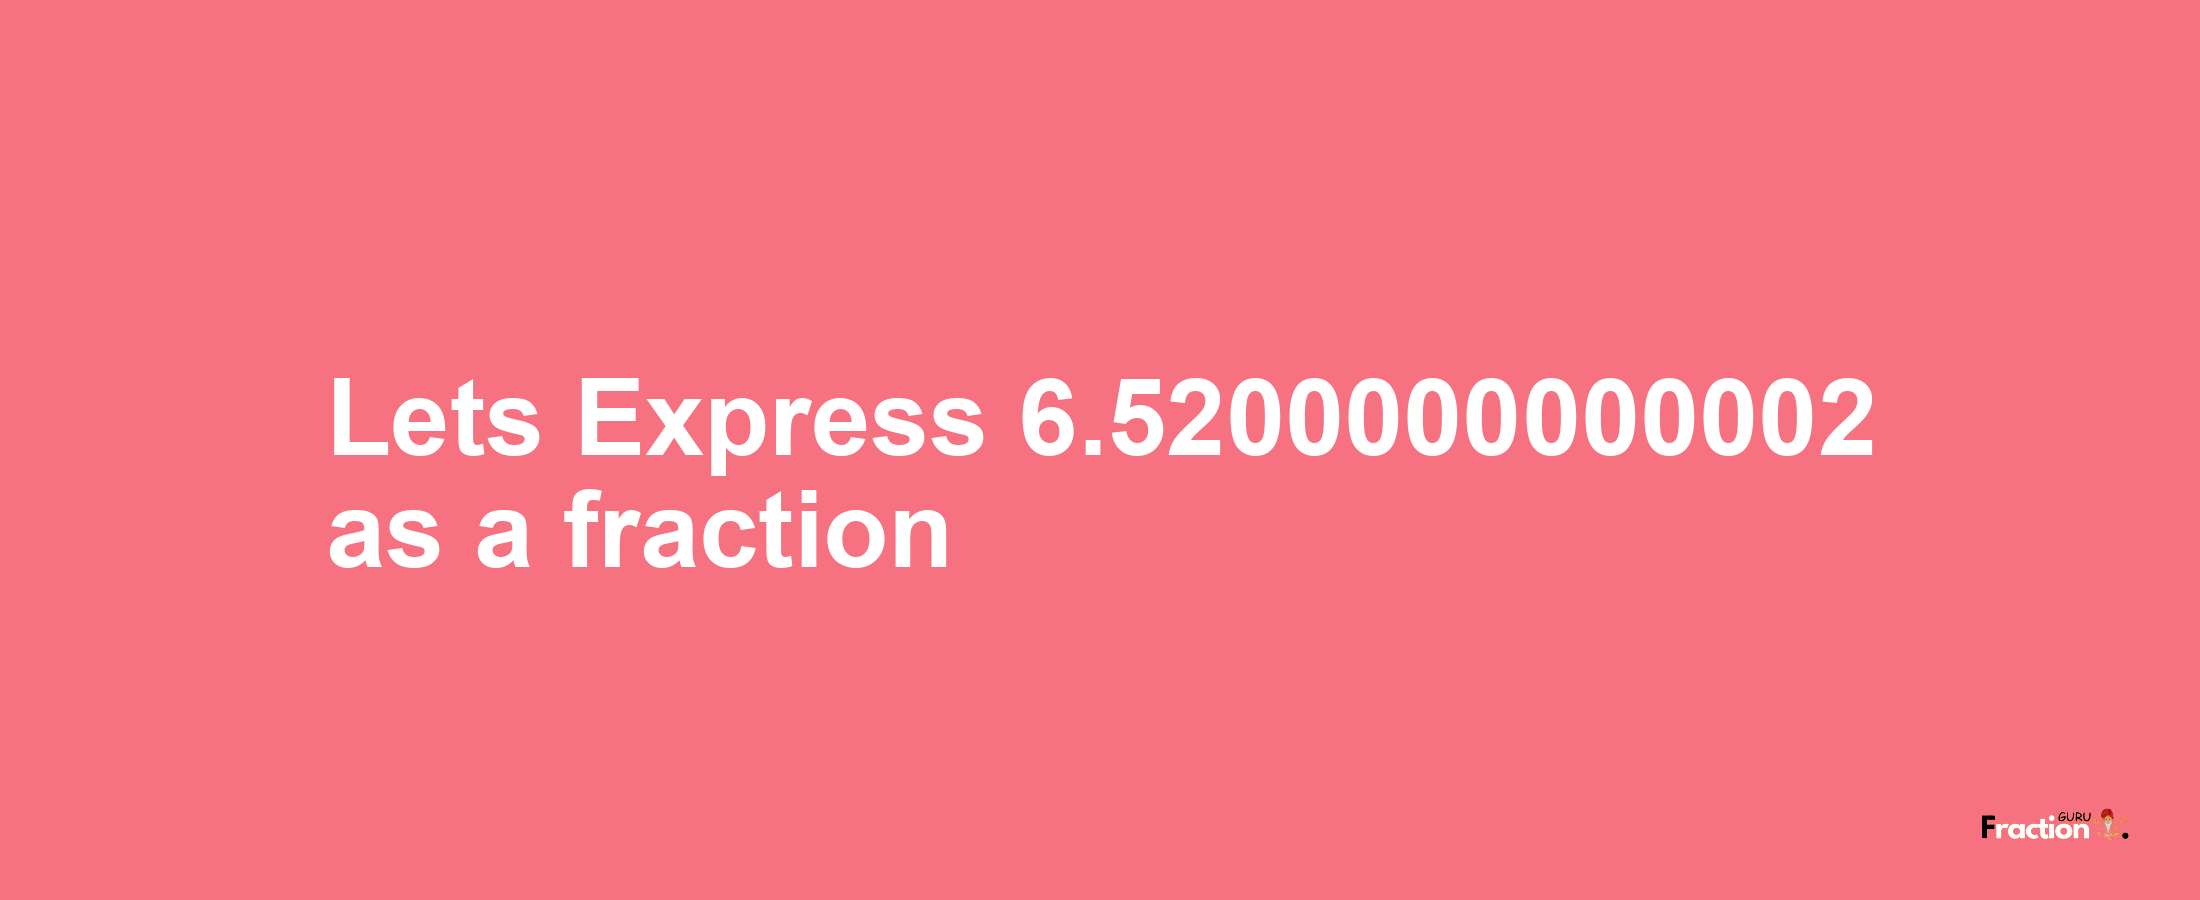 Lets Express 6.5200000000002 as afraction